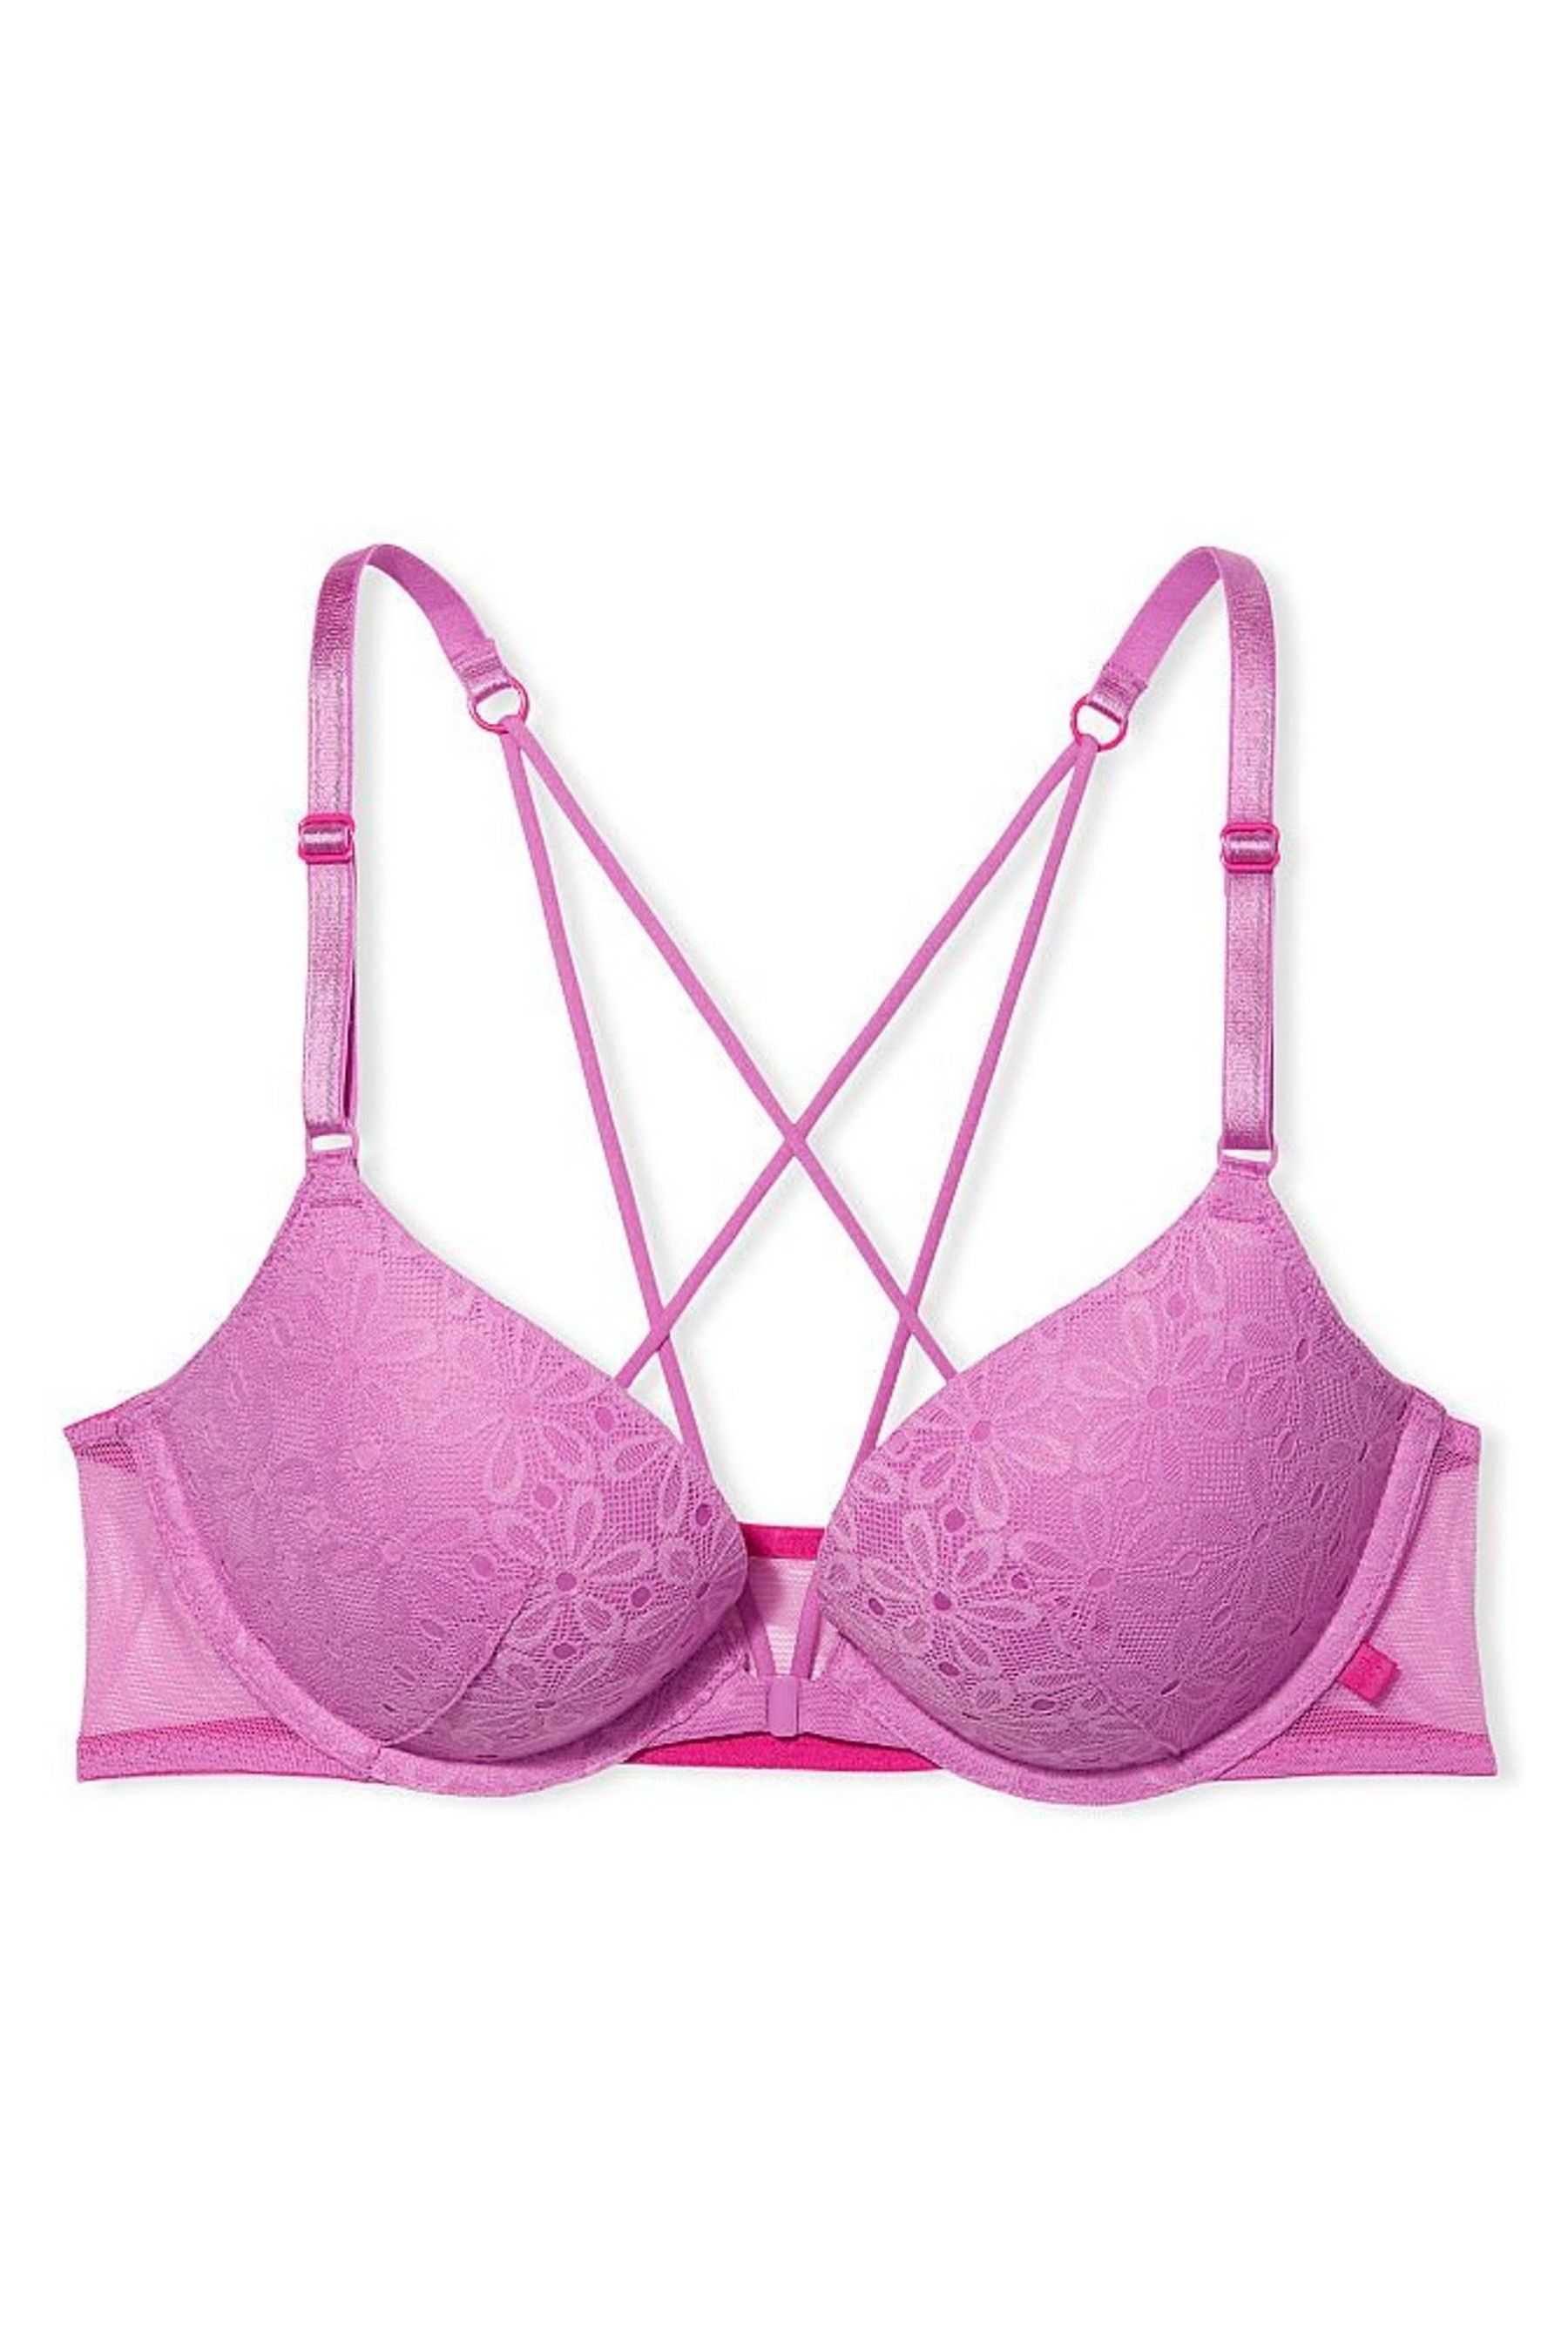 Buy Victoria's Secret Lace Front Fastening Push Up T-Shirt Bra from the ...